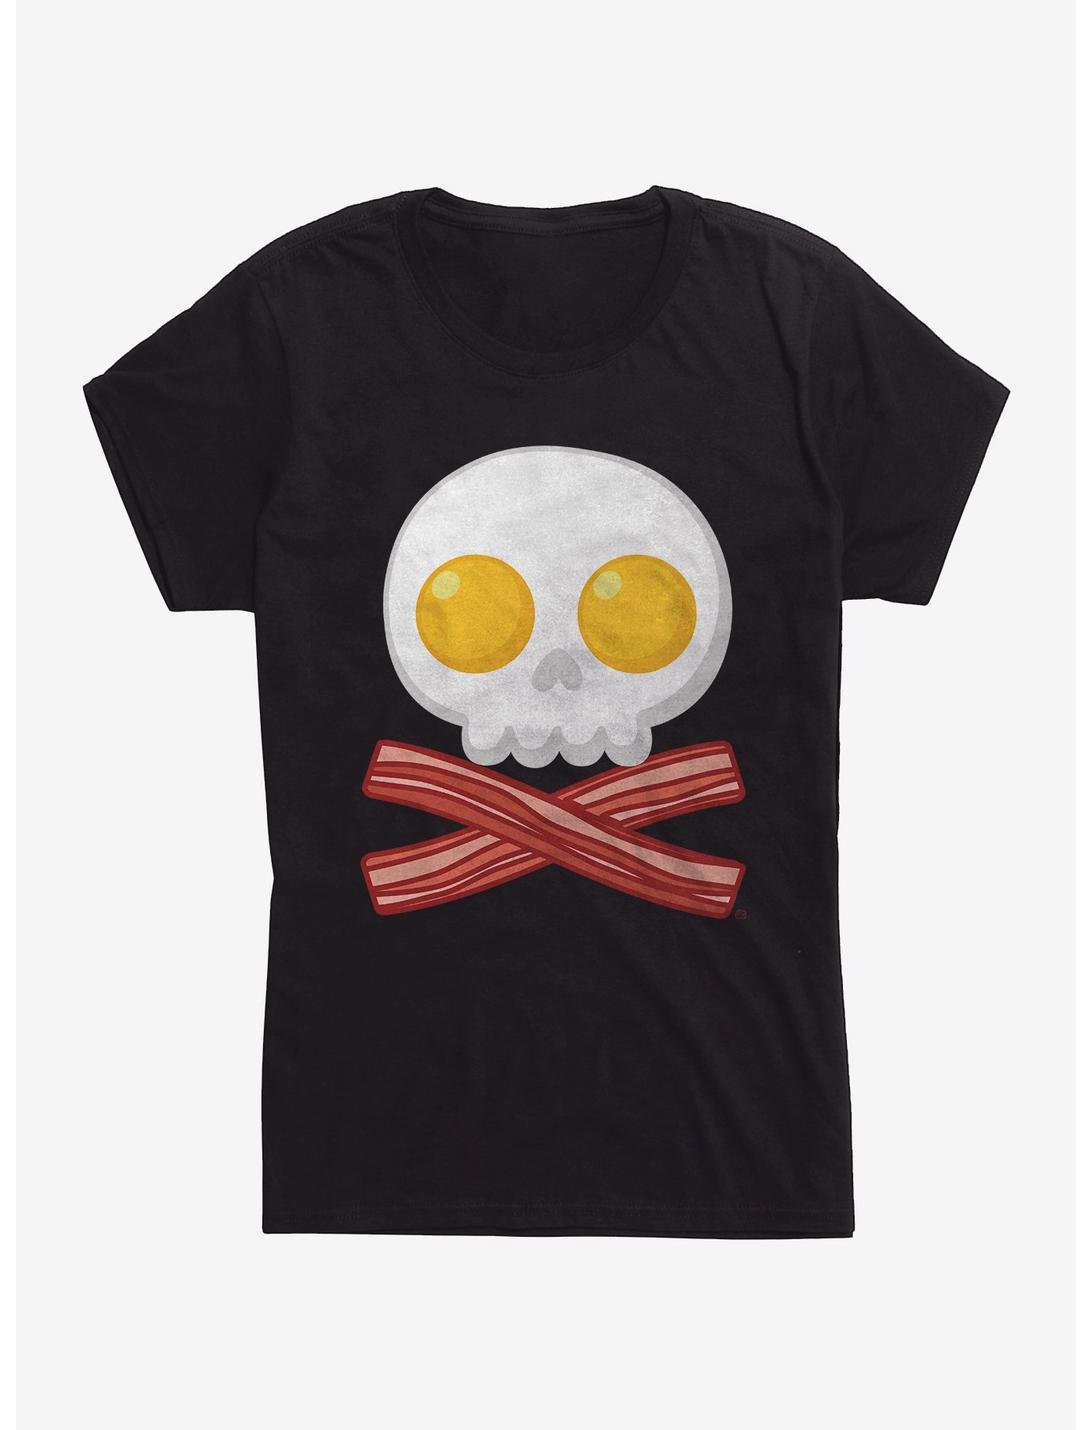 Bacon And Death T-Shirt, BLACK, hi-res